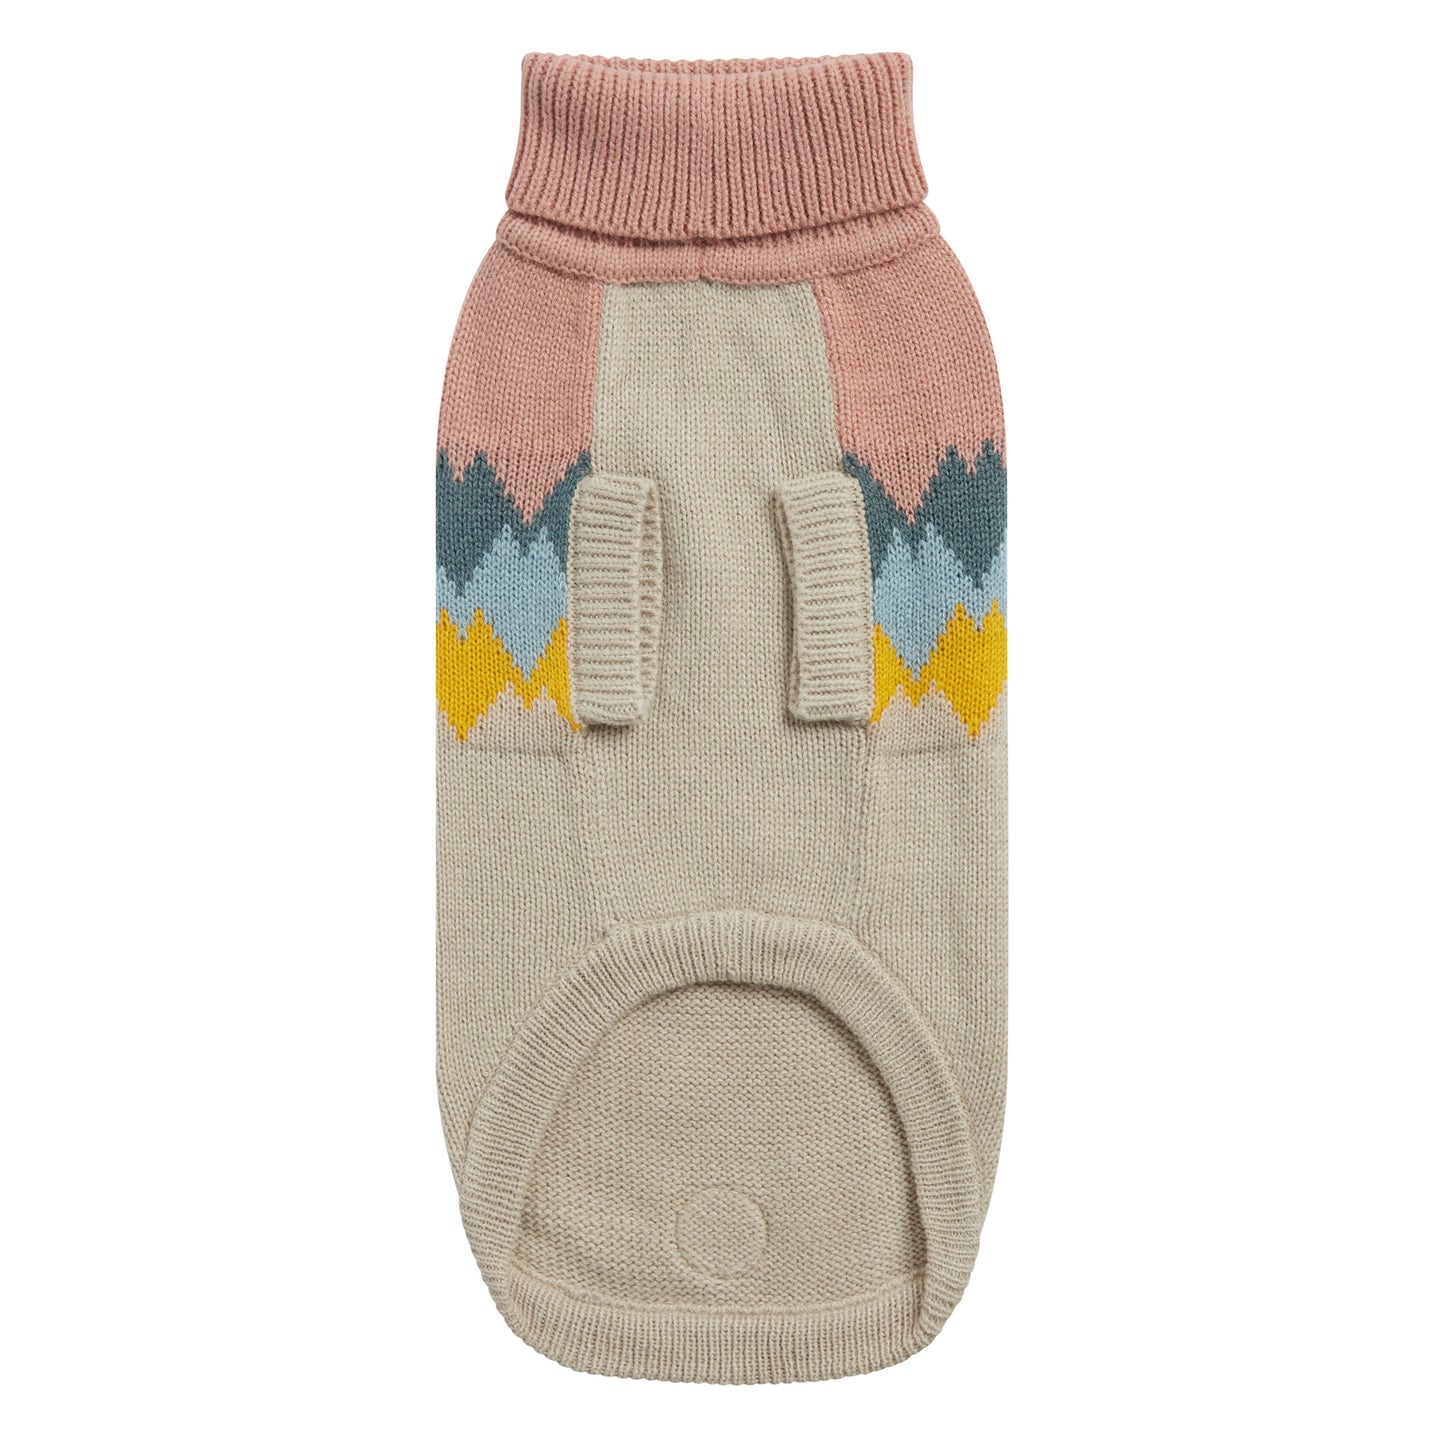 the underside of a beige and pink dog sweater with colorful mountain peaks graphic